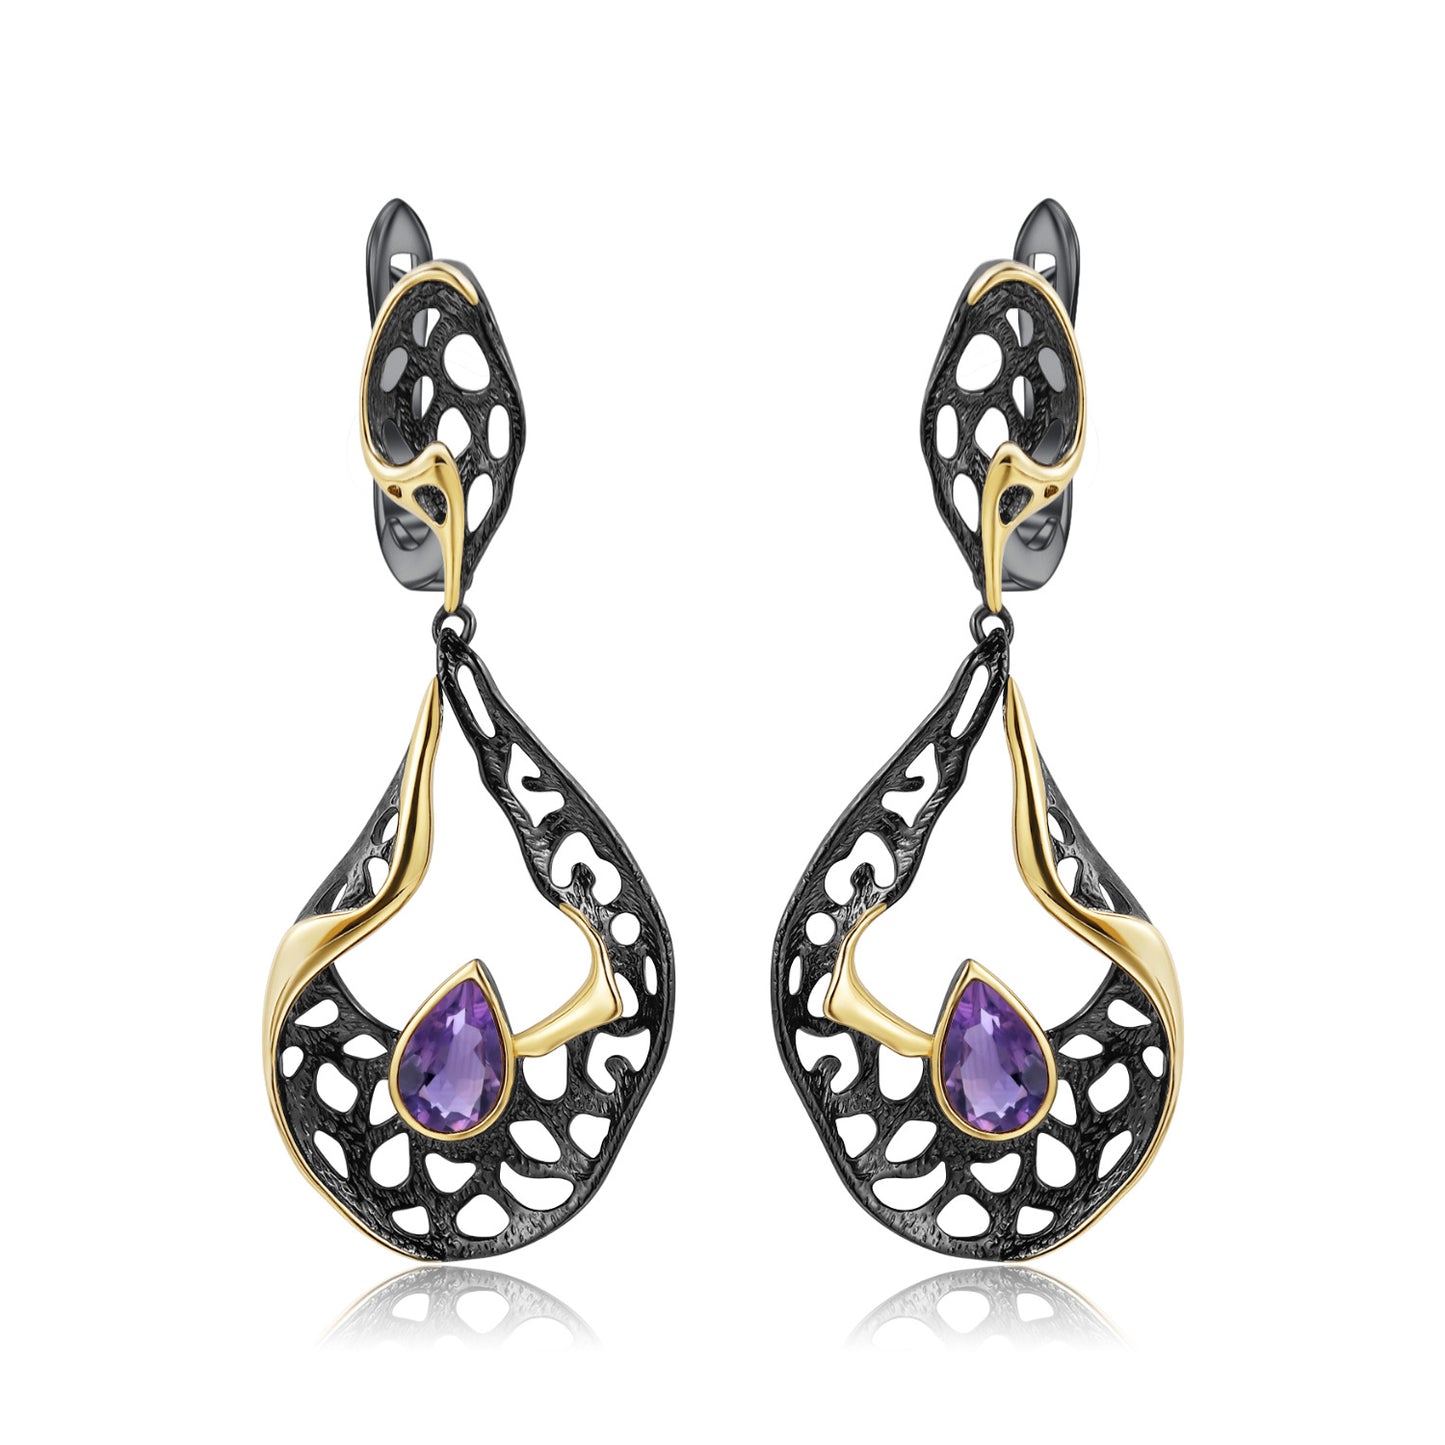 Italian Antique Premium Style Inlaid Natural Colourful Gemstone Creative Shape Silver Drop Earrings for Women